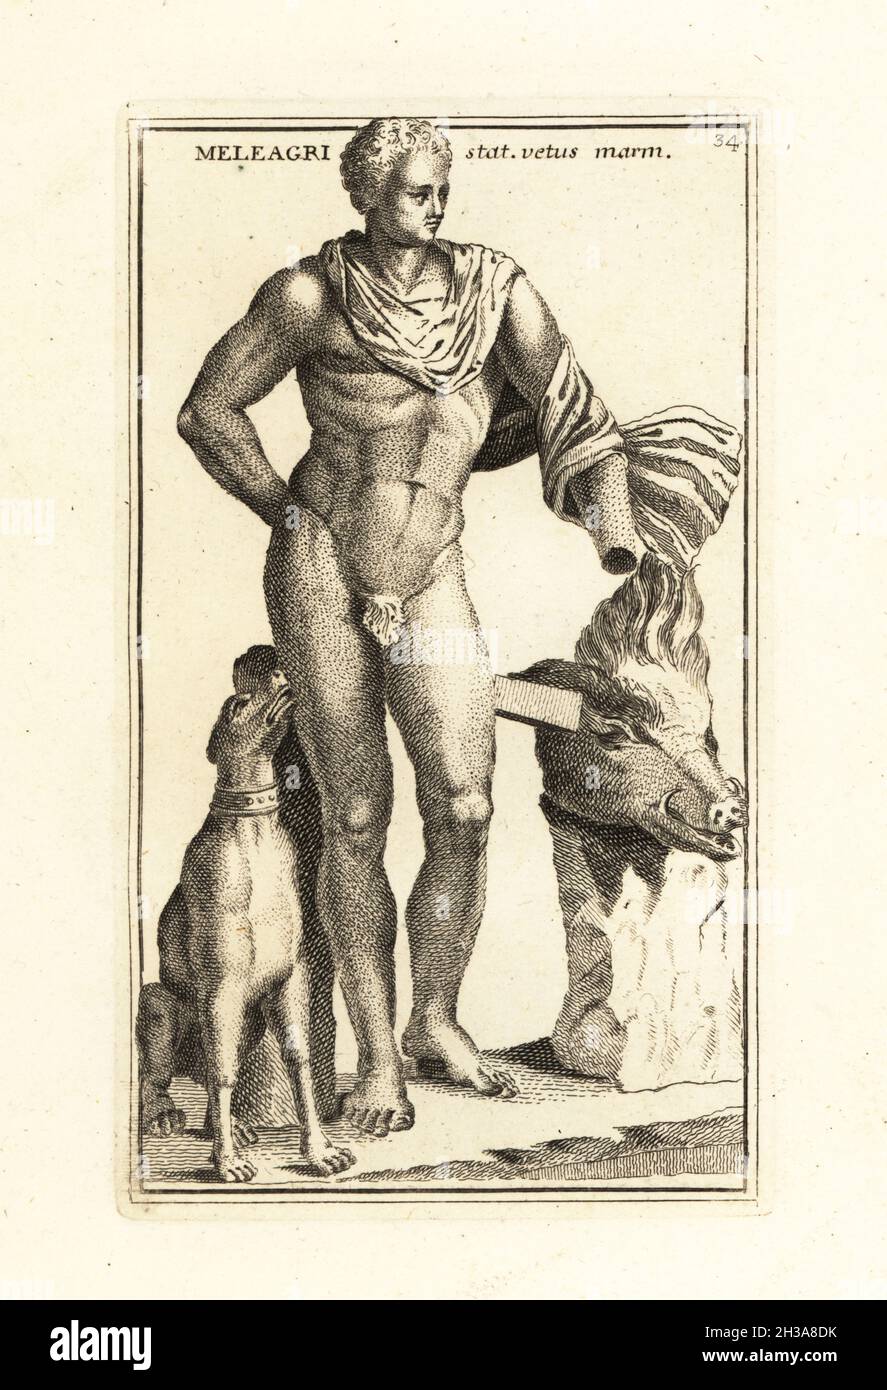 Statue of Meleager, mythical hero of Aetolia, with his hunting dog and the head of the Calydonian boar. Copy of a Greek original of the 4th century BC attributed to Skopas. Now in the Vatican. Meleagri statua vetus marmorea. Copperplate engraving by Giovanni Battista Cannetti from Copperplates of the most beautiful ancient statues of Rome, Calcografia di piu belle statue antiche a Roma, engraved by Cannetti all'Arco della Ciambella, published by Gaetano Quojani, Rome, 1779. Stock Photo